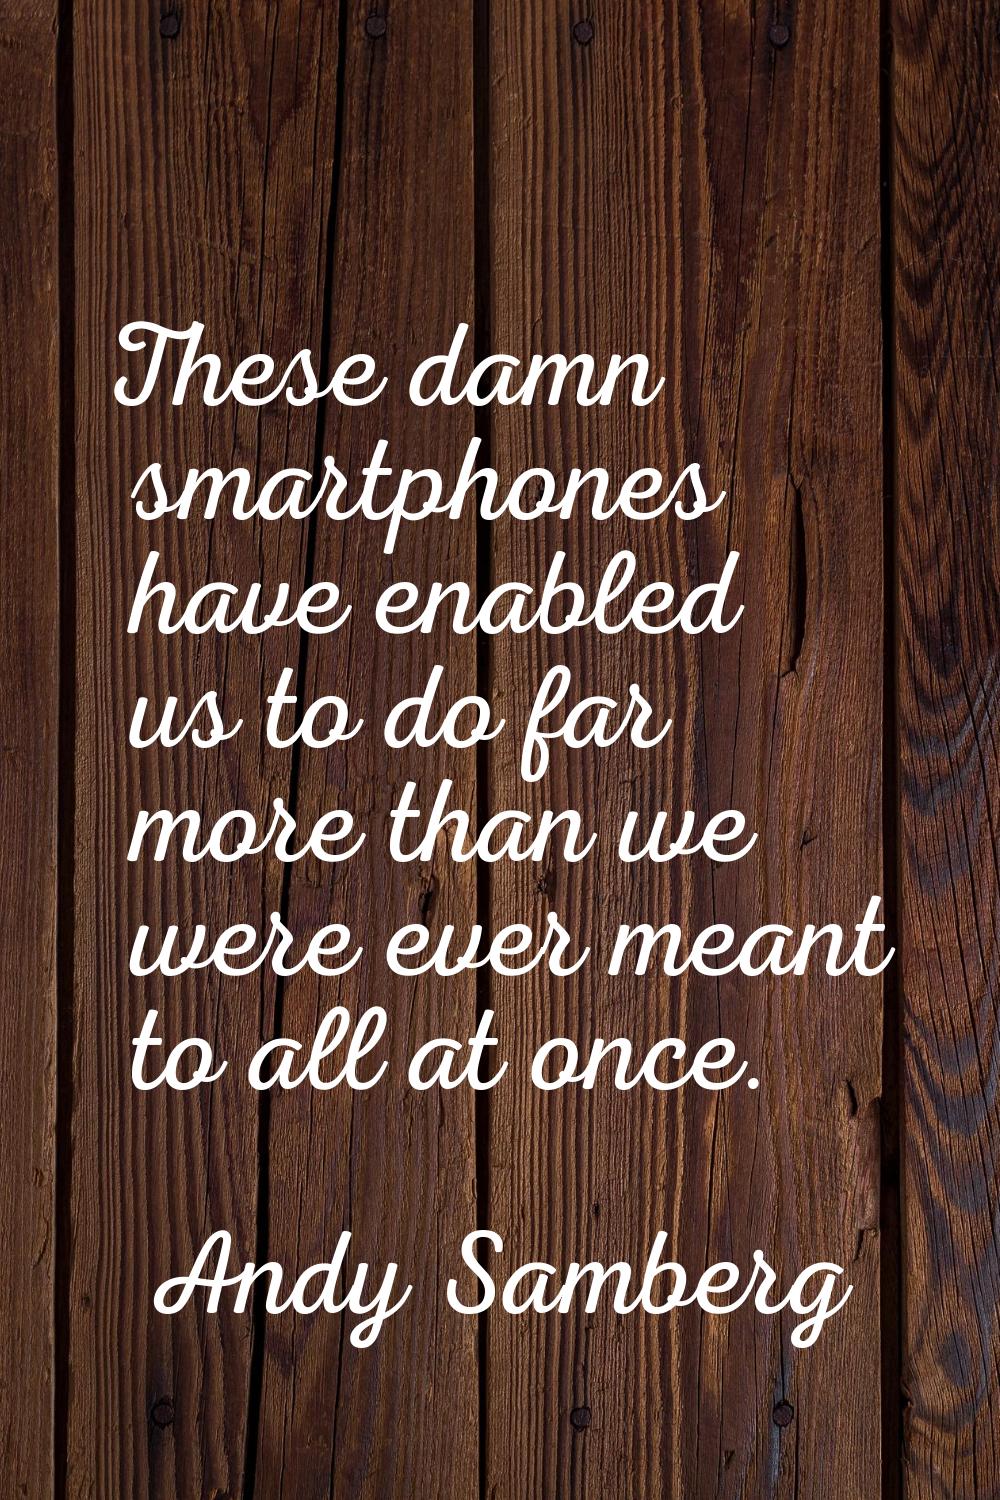 These damn smartphones have enabled us to do far more than we were ever meant to all at once.